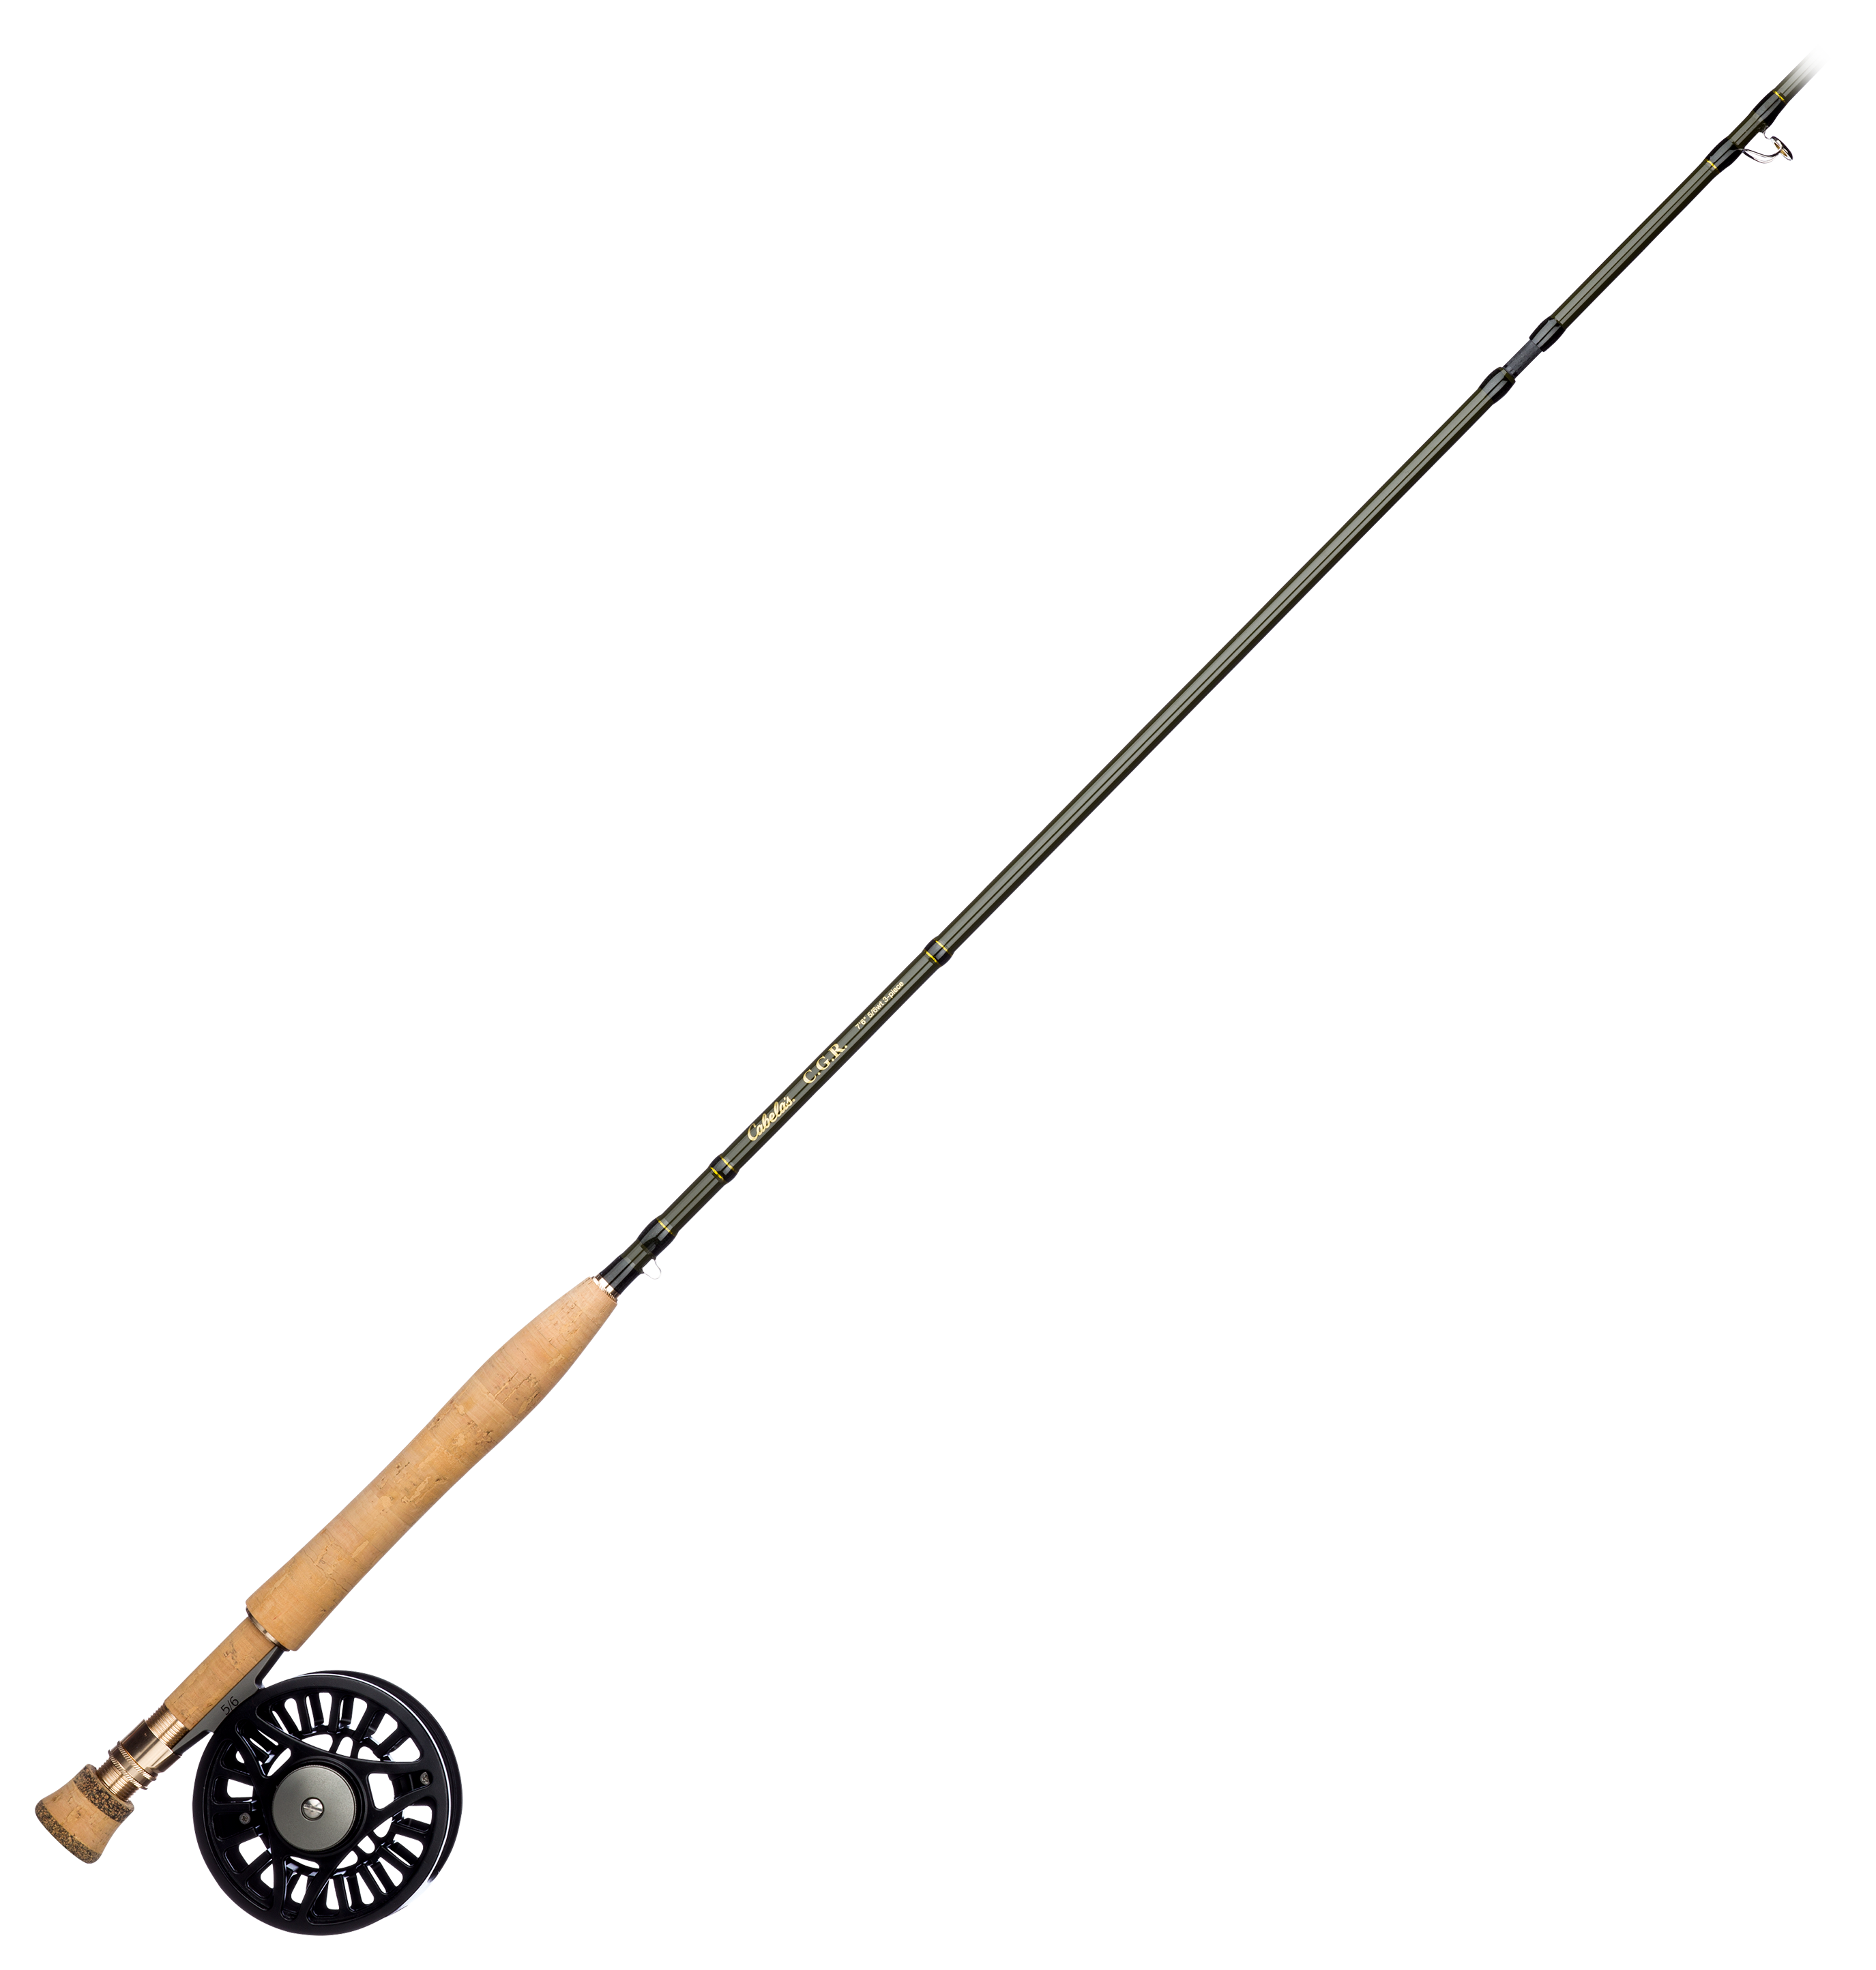 Cabela's Prestige II Reel and CGR Rod Fly Outfit - CGR7053/PPII-34